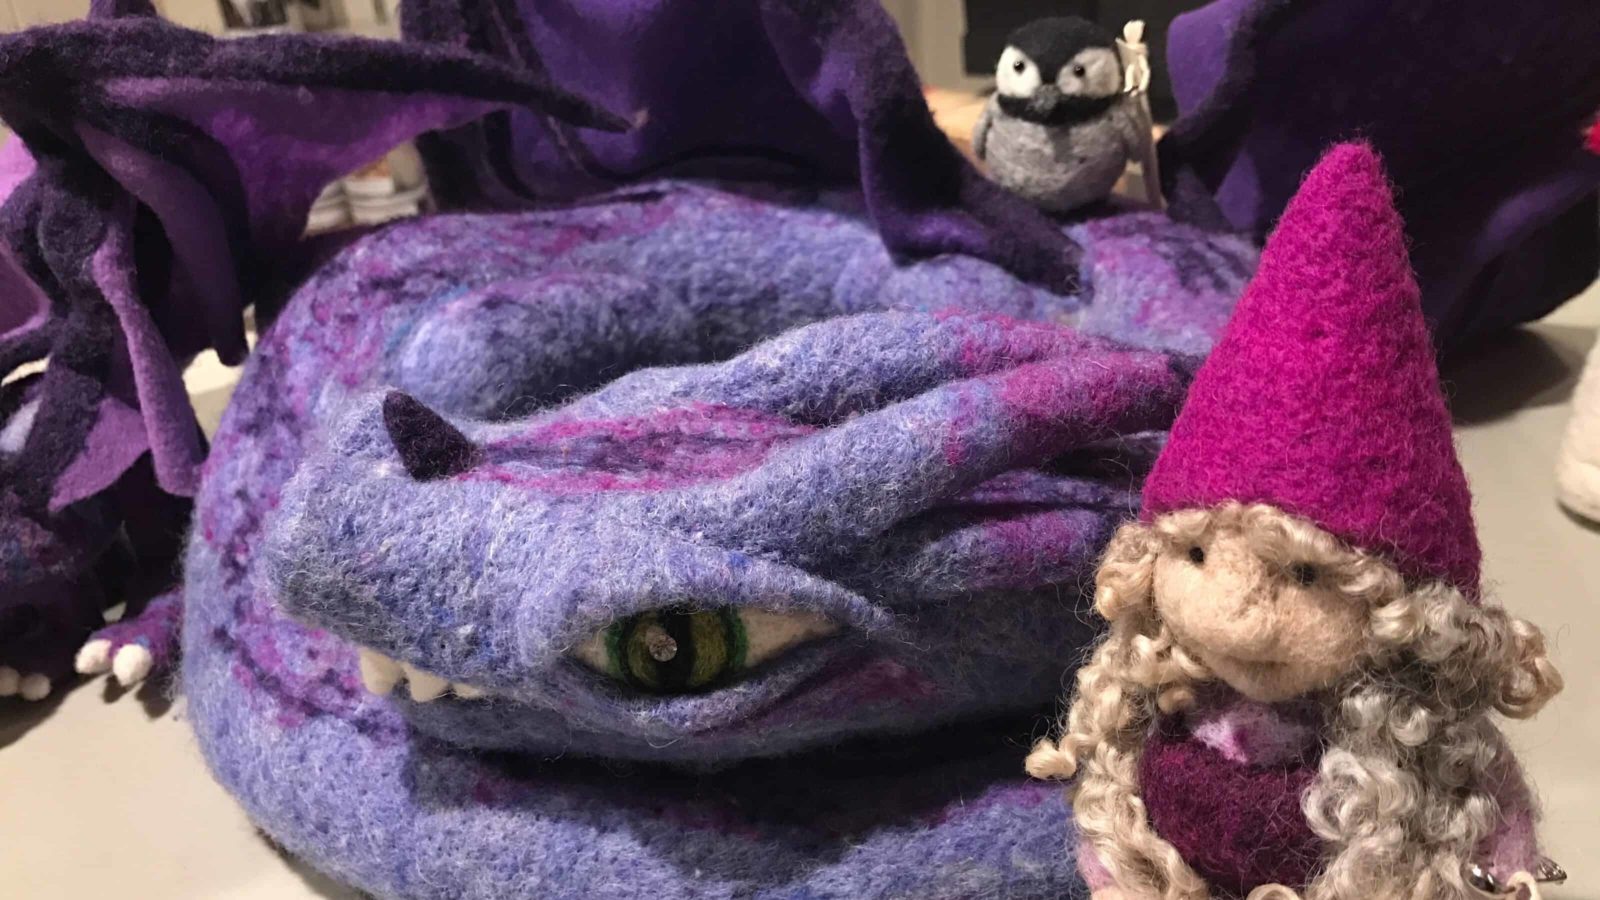 A purple dragon curles around a purple-capped girl in a Going Gnome felted wool sculpture.